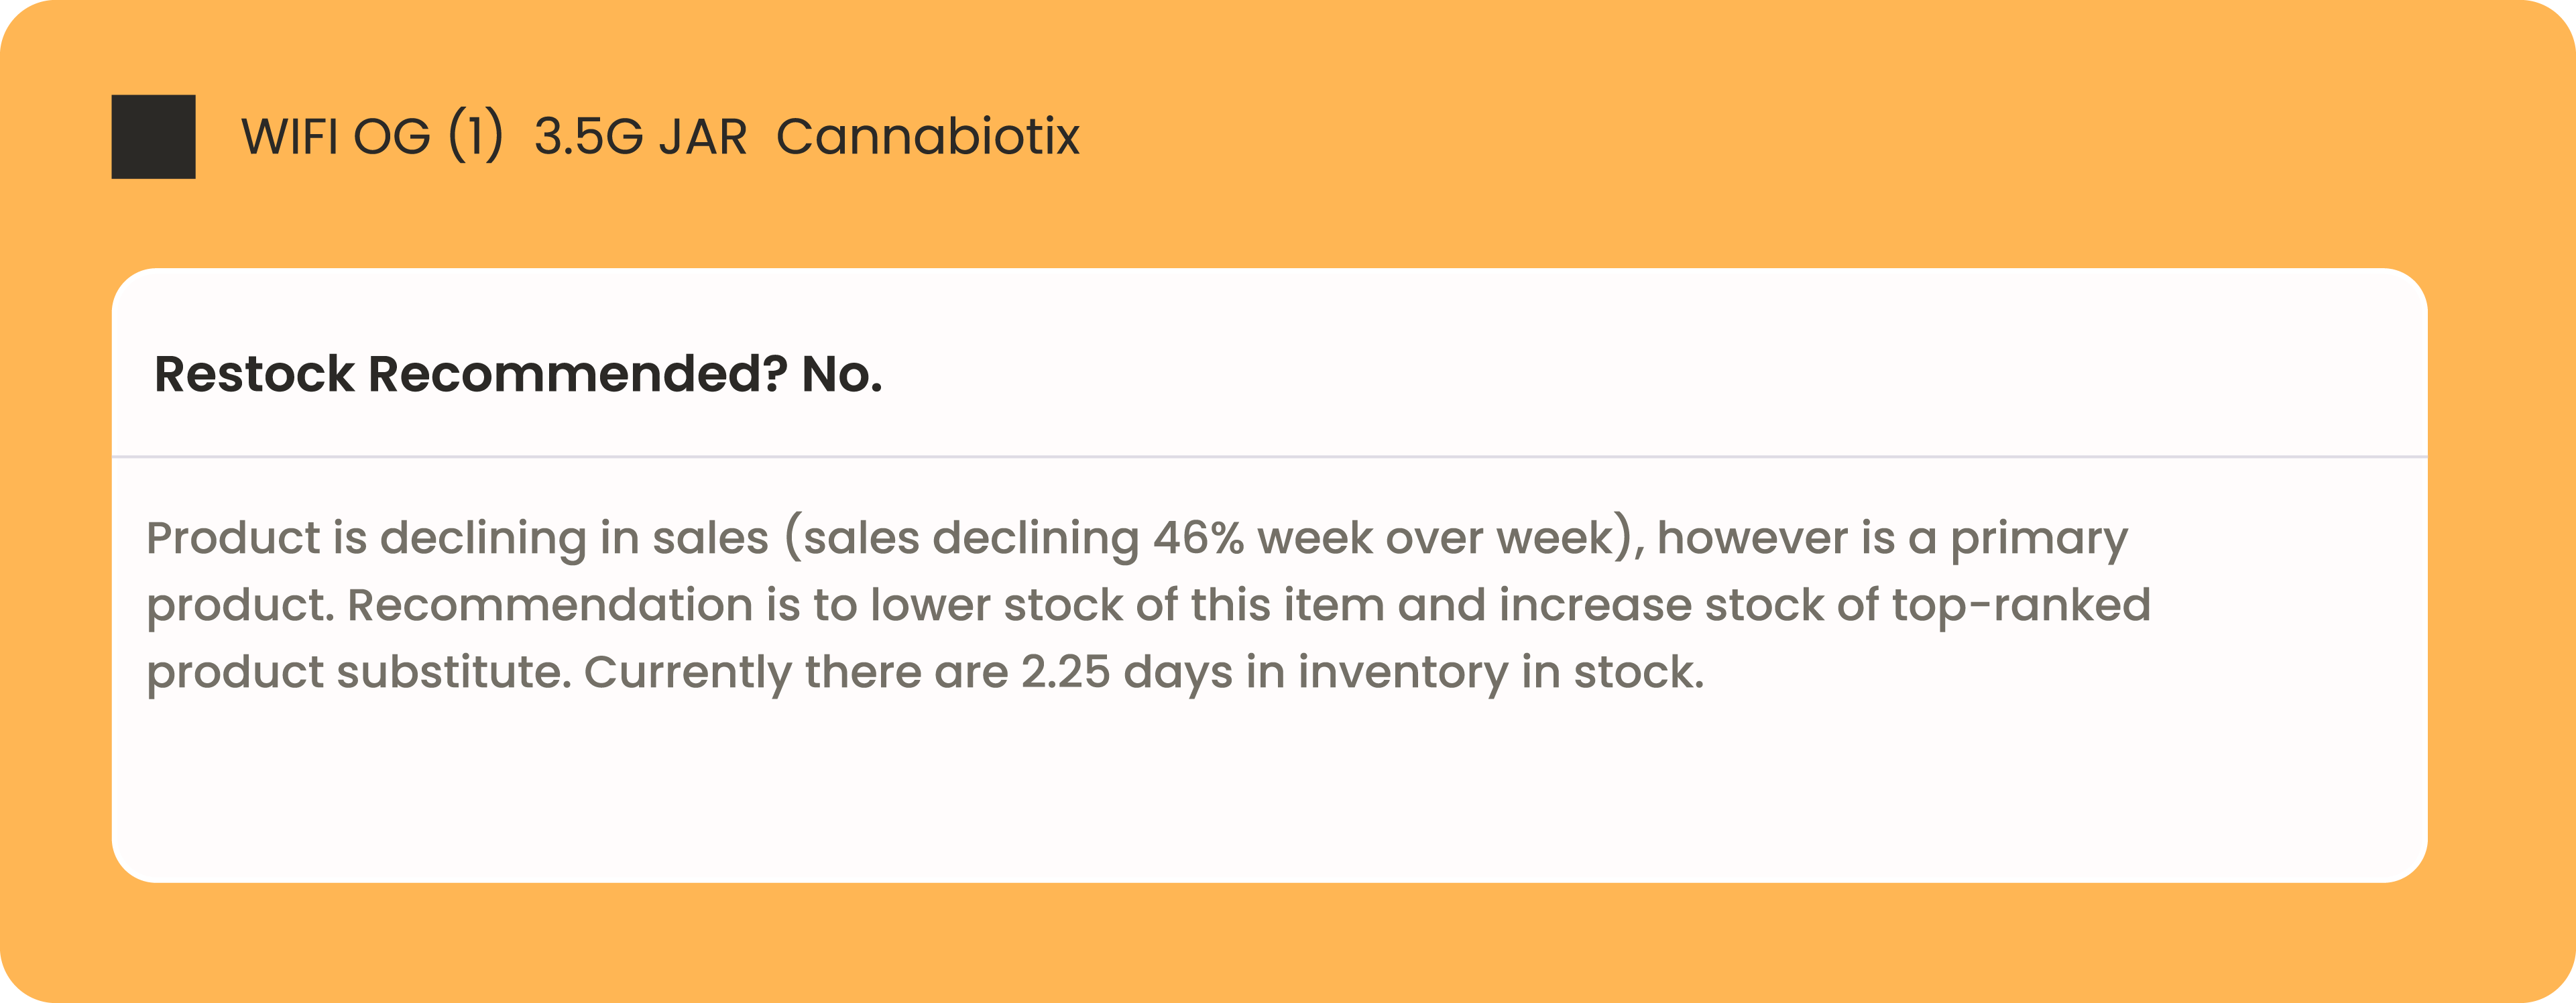 Happy Buyers re-stock recommendations use machine-learning and cannabis dispensary POS data to recommend whether or not you should restock a SKU based on historical data and sales trends.